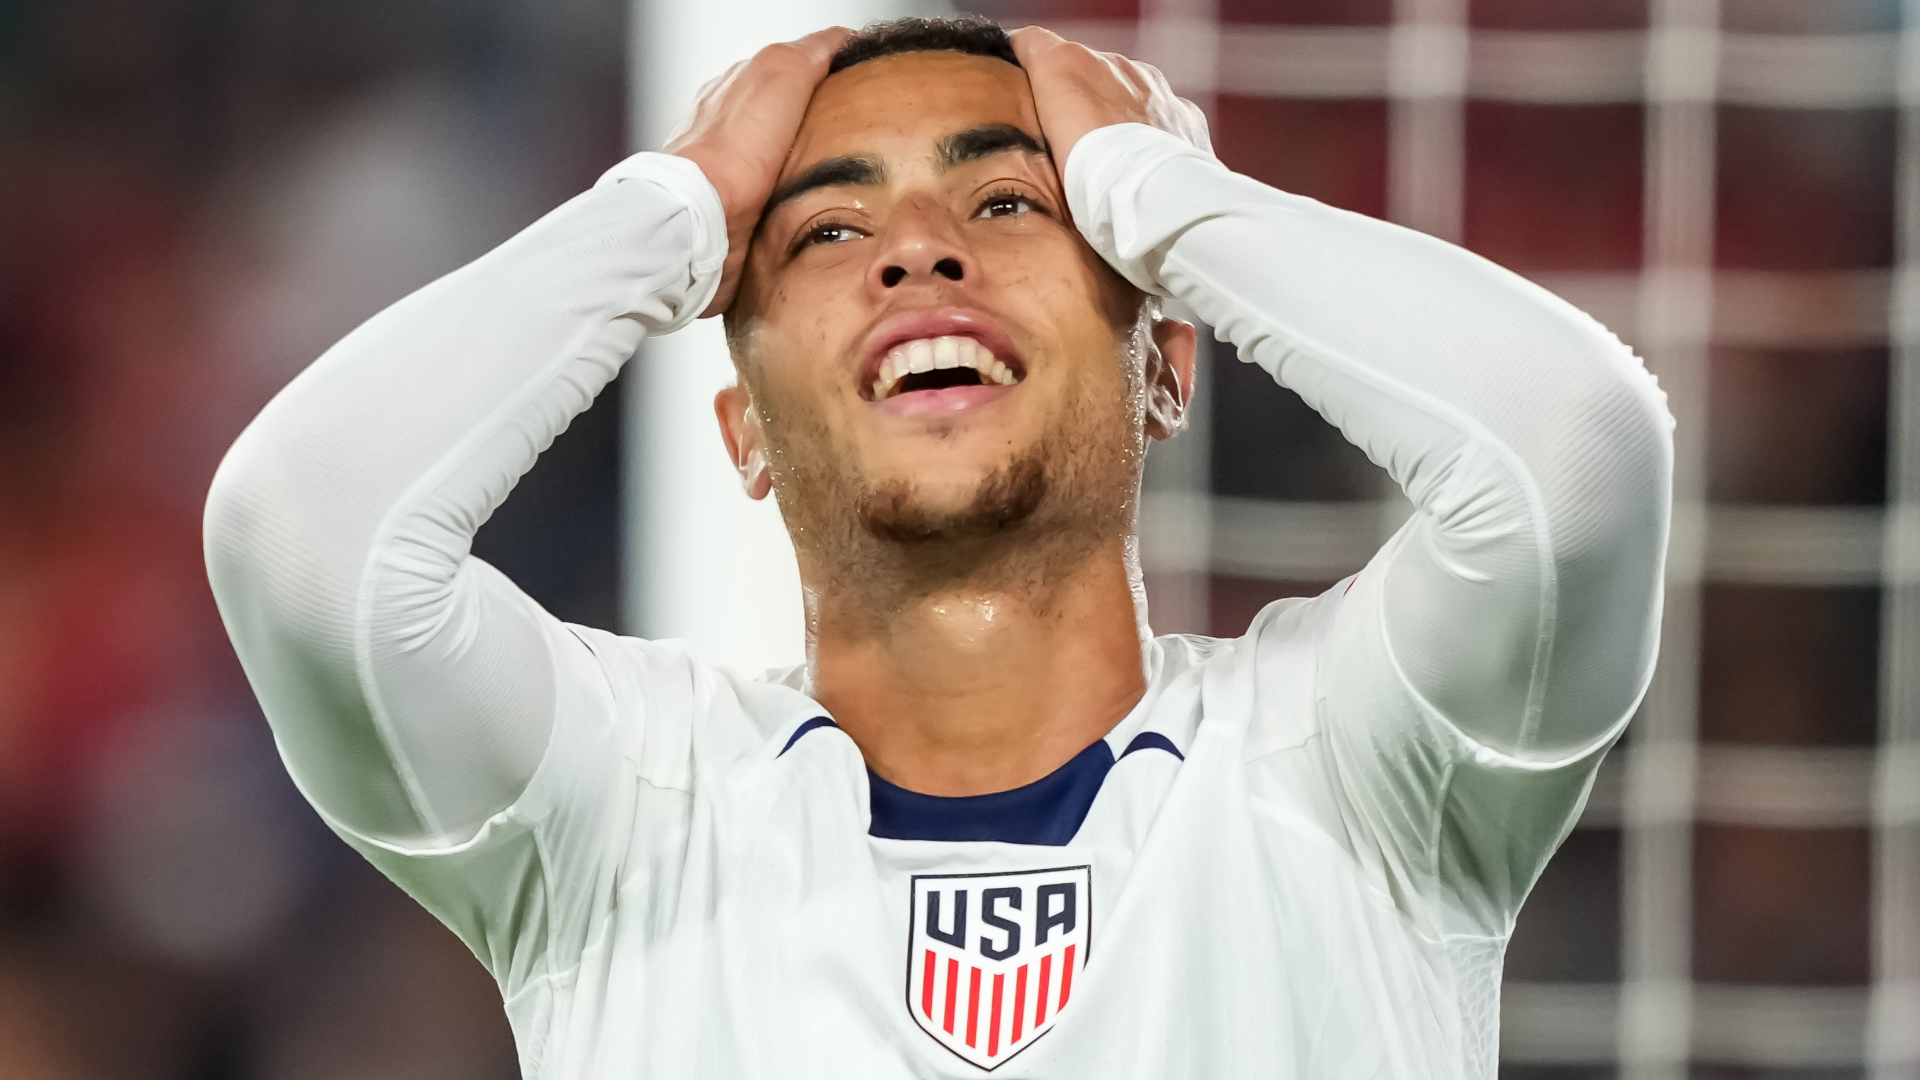 'Like playing the Euros in Africa!' - Sergino Dest shockingly claims United States hosting 2024 Copa America 'doesn't make sense' as he launches scathing attack on tournament organisers